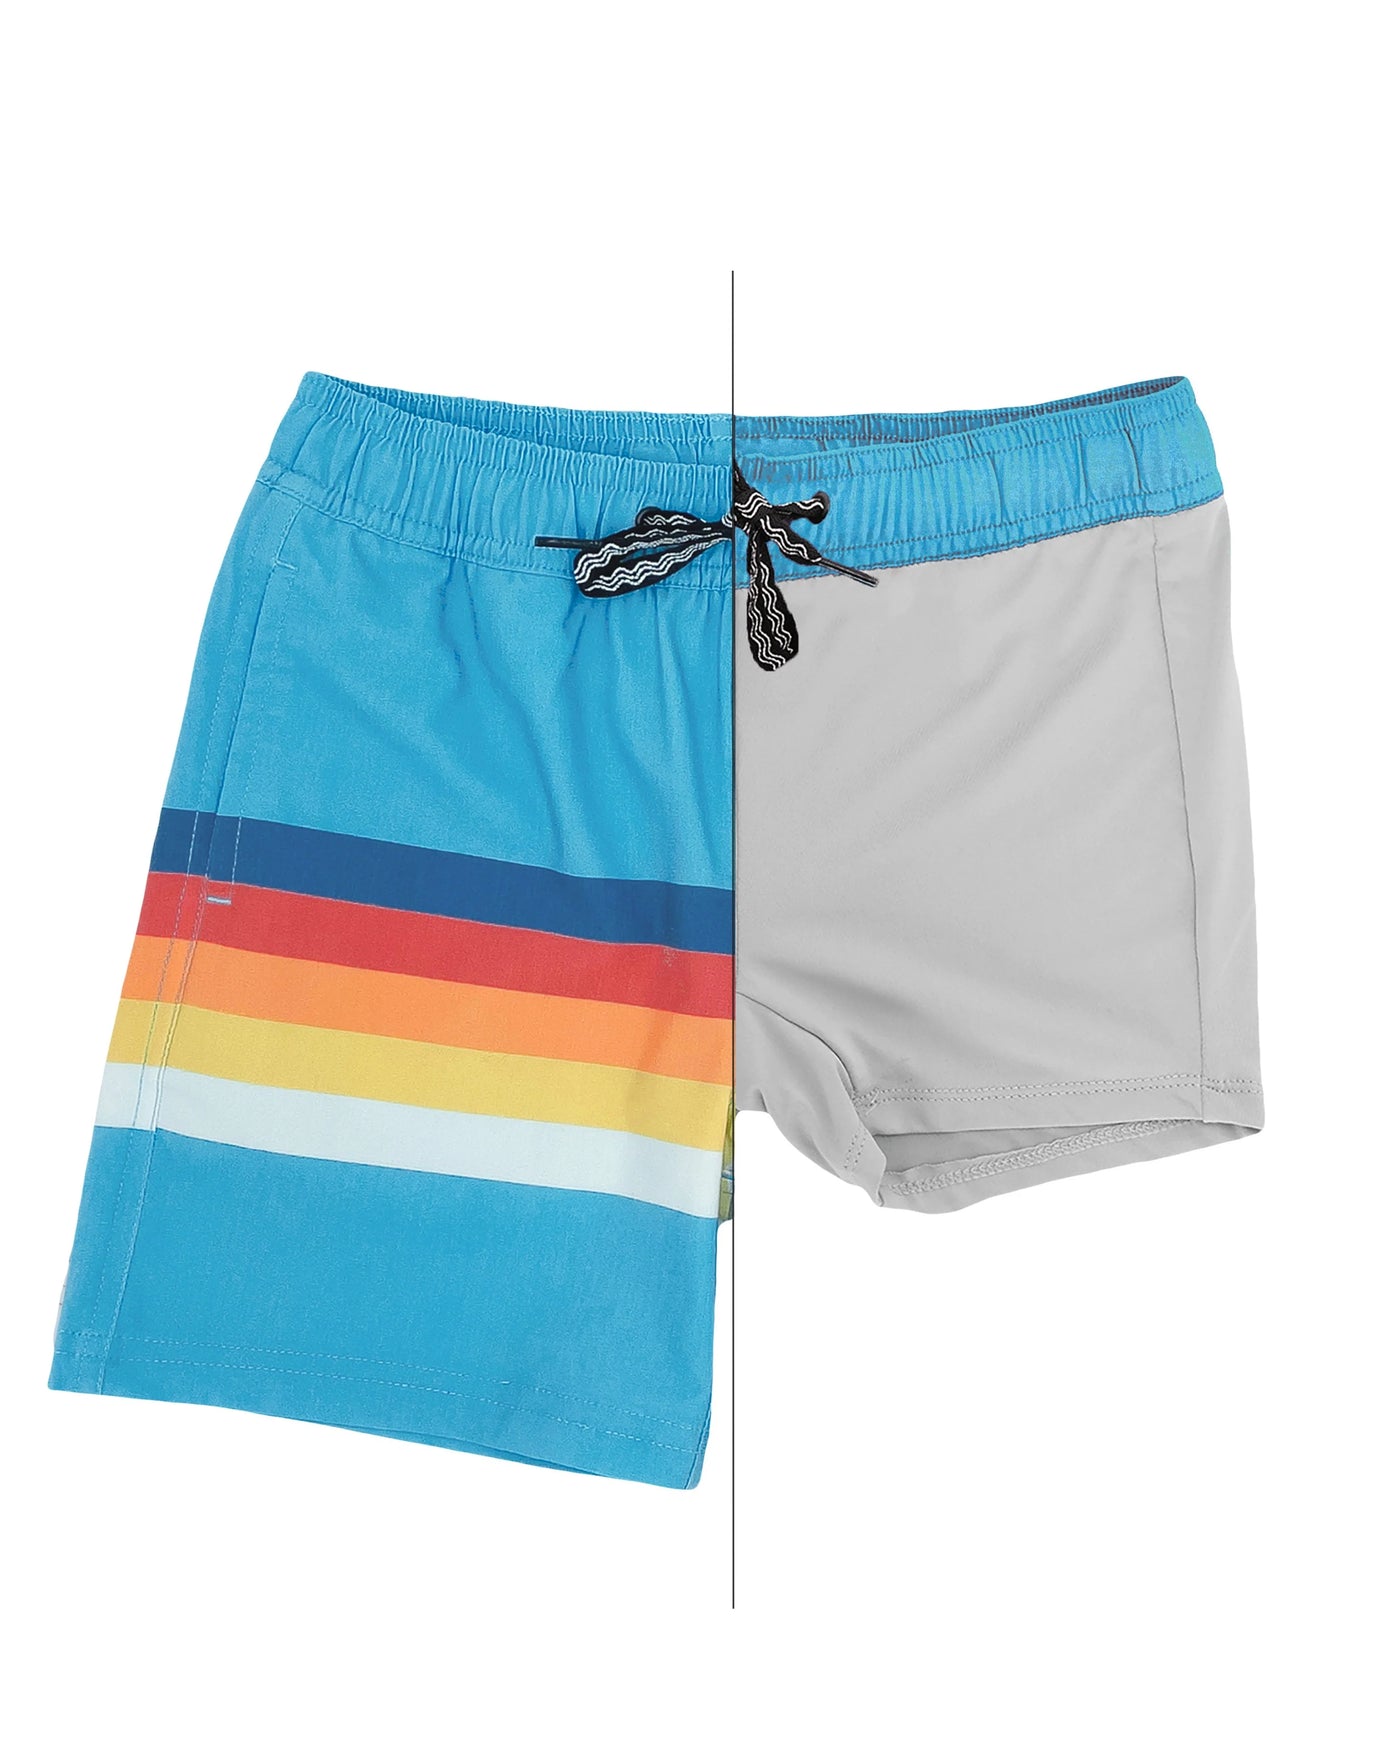 Stripe Volley Blue Grotto Trunk